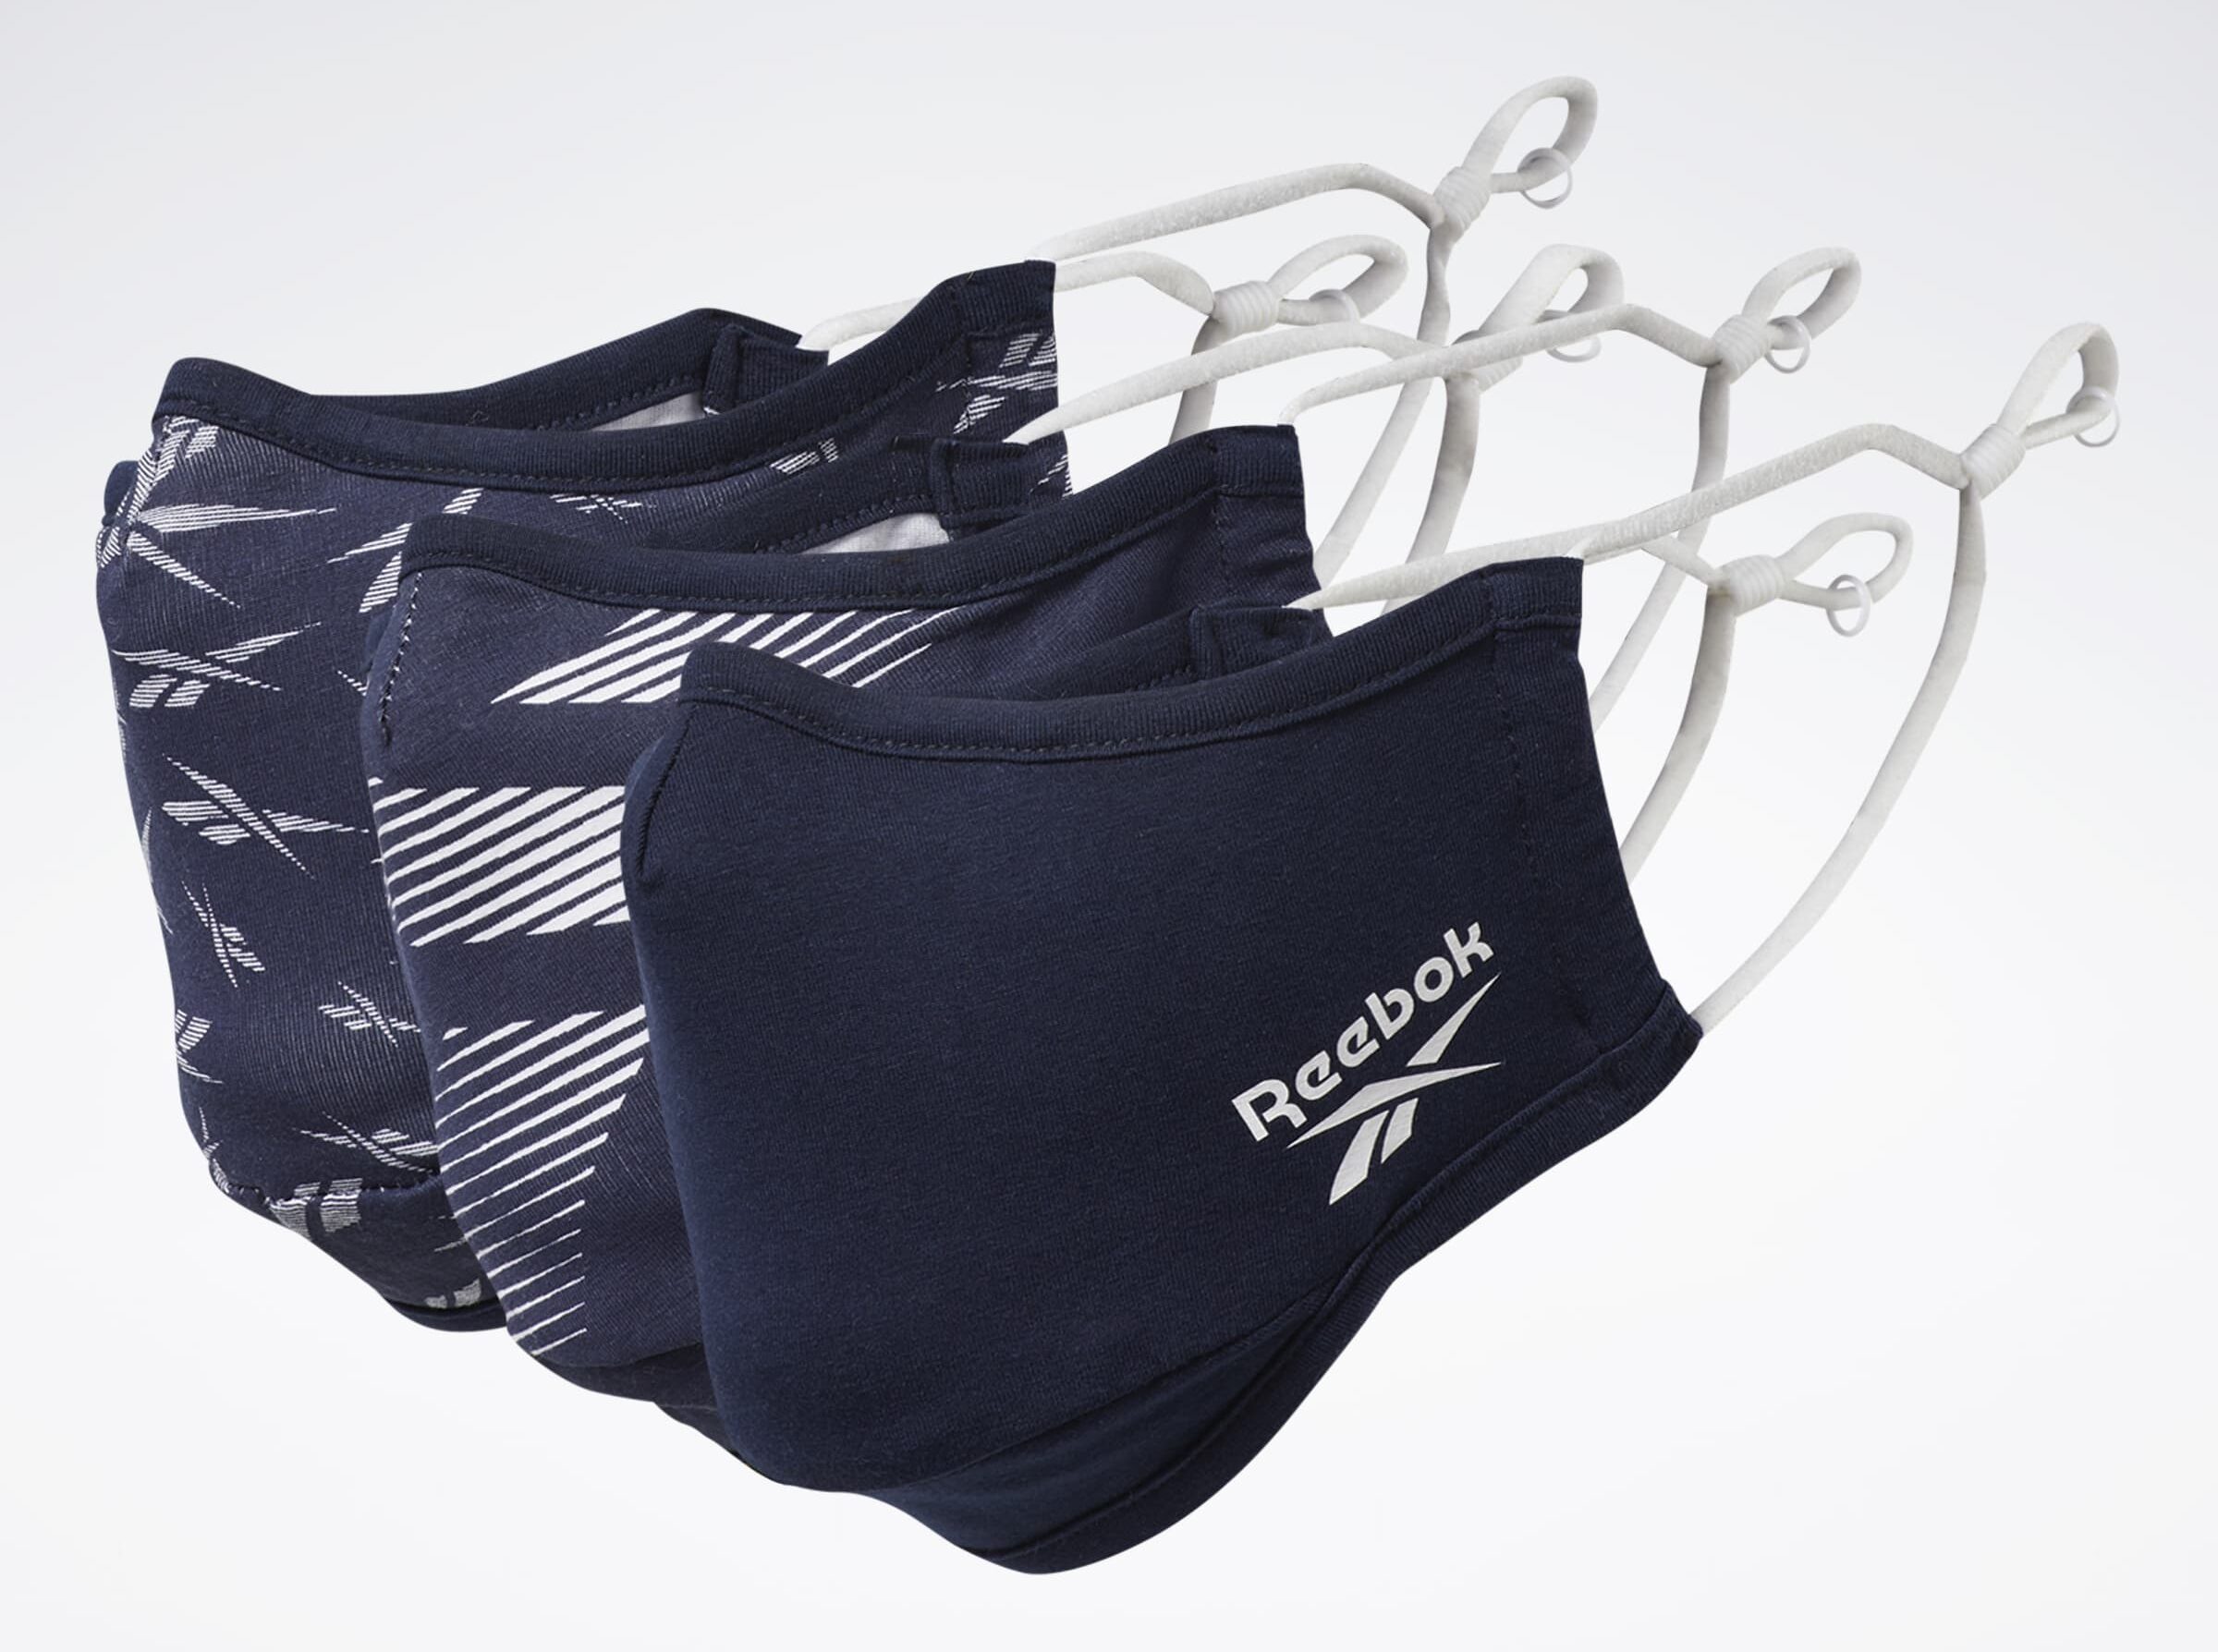 Reebok Expands Face Cover Offerings with New Adjustable Options ...